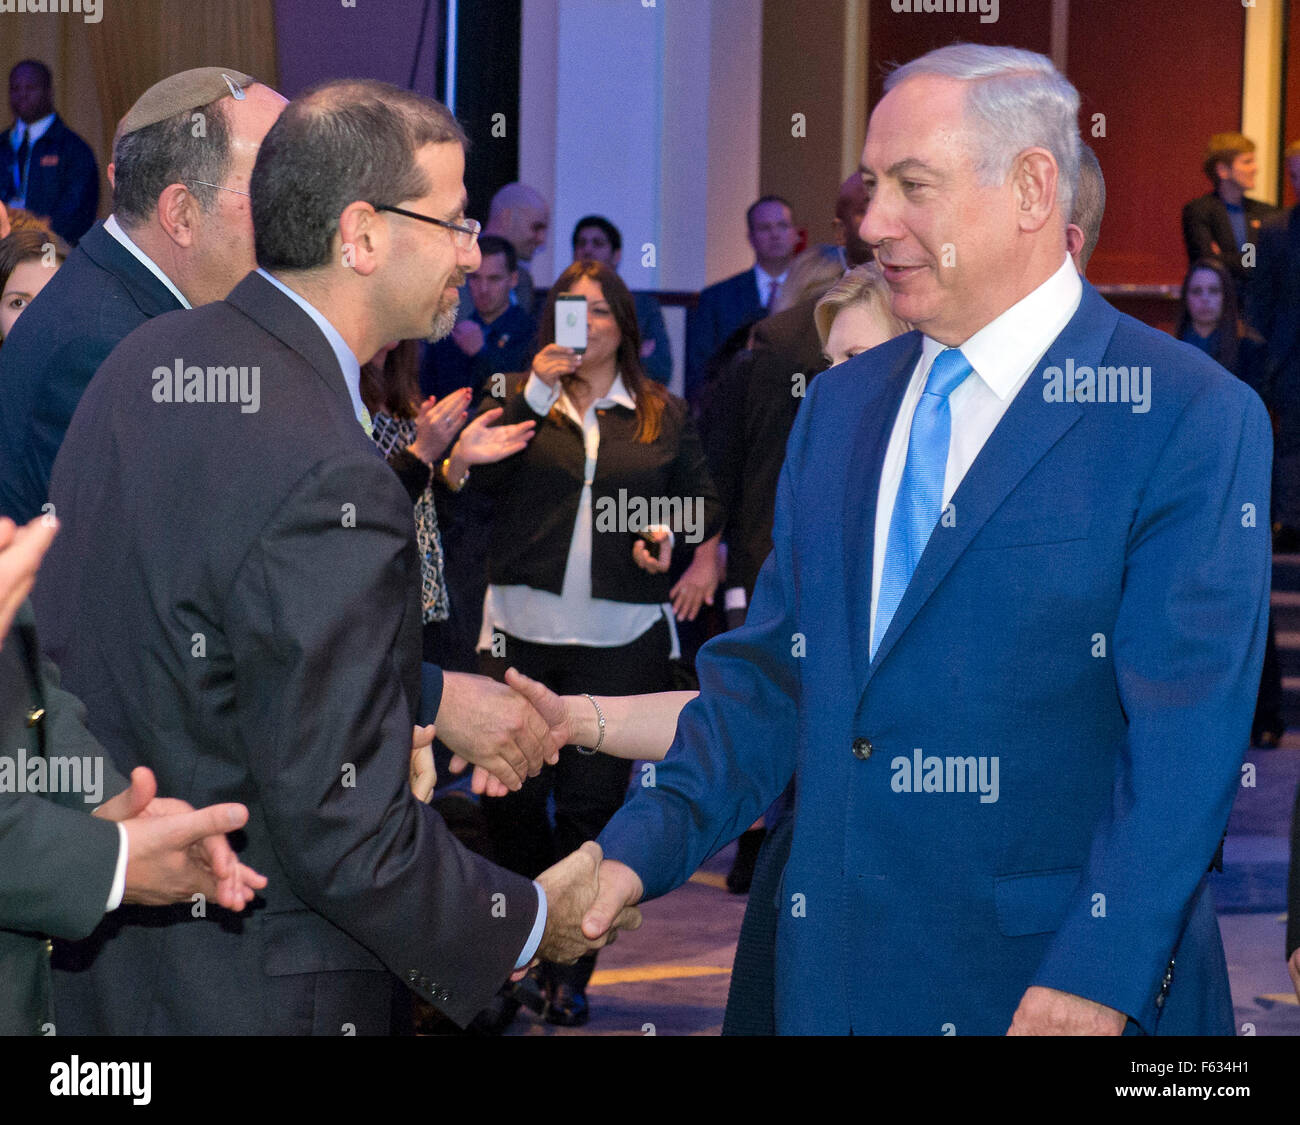 Washington DC, USA. 10th Nov, 2015. Prime Minister Benjamin Netanyahu of Israel, right, shakes hands with United States Ambassador to Israel Dan Shapiro, left, as he arrives to address the 2015 Jewish Federations of North America General Assembly at the Washington Hilton Hotel in Washington, DC on Tuesday, November 10, 2015. Credit: Ron Sachs/CNP - NO WIRE SERVICE - Credit:  dpa picture alliance/Alamy Live News Stock Photo